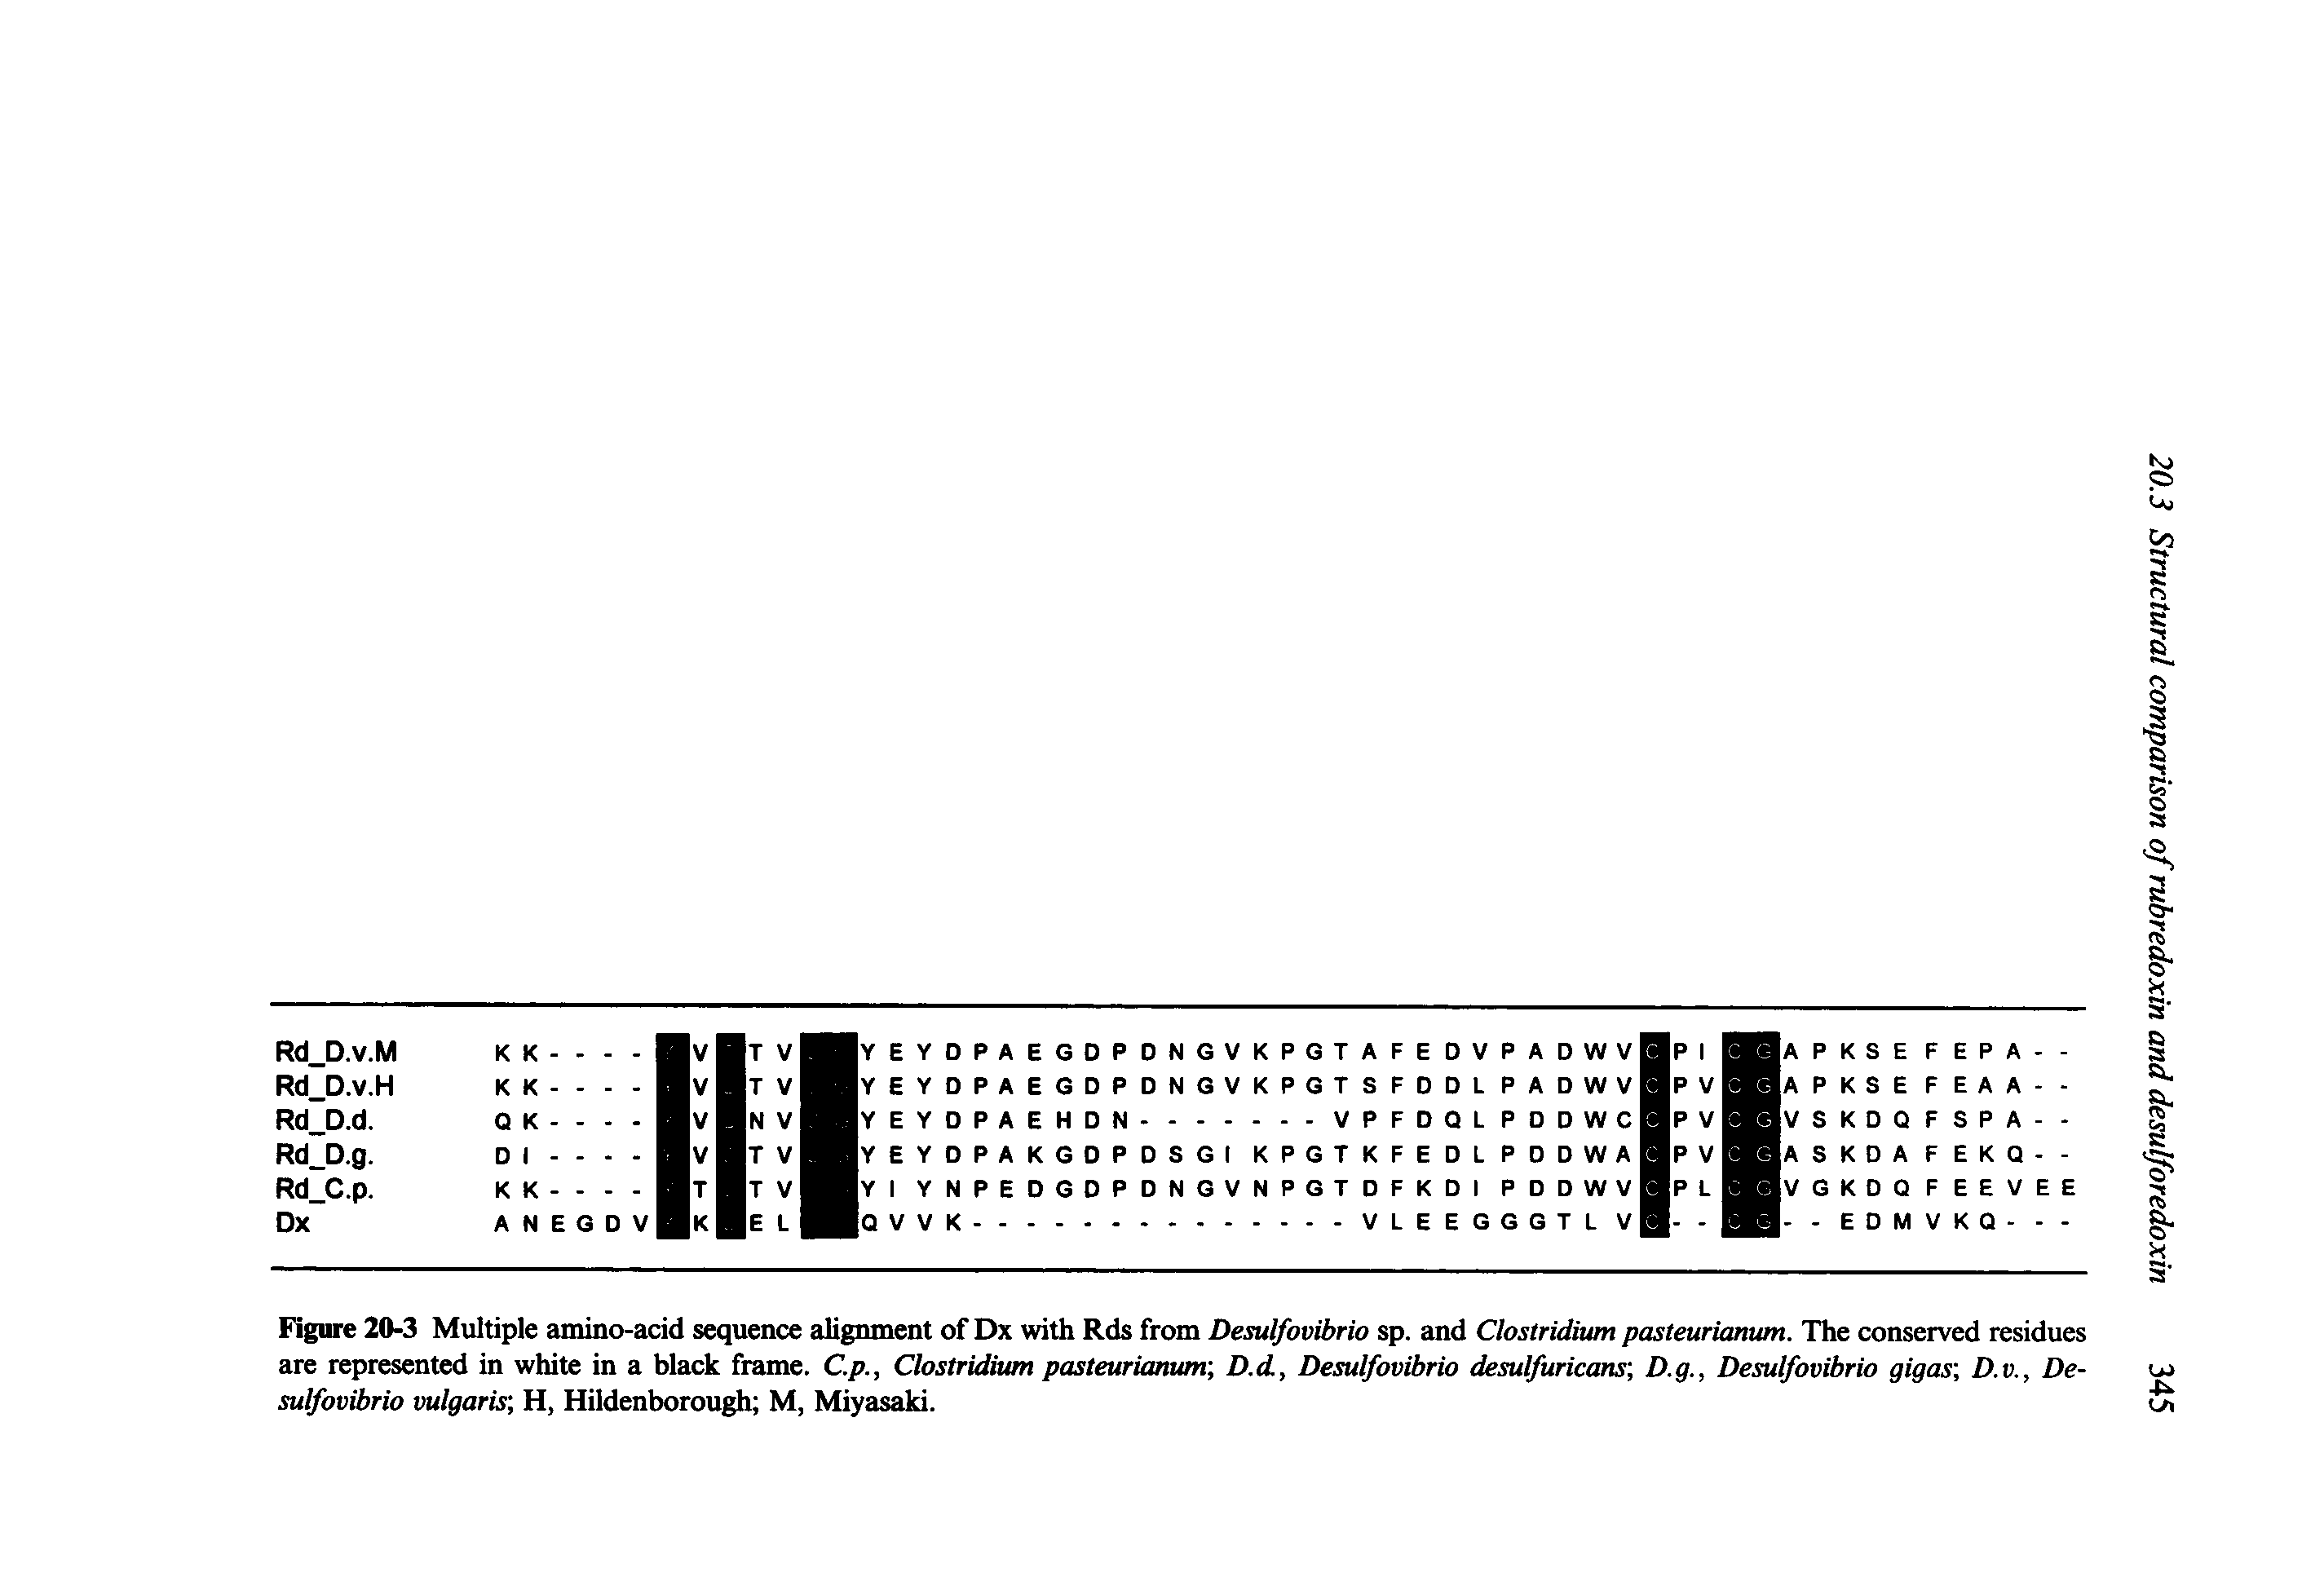 Figure 20-3 Multiple amino-acid sequence alignment of Dx with Rds from Desulfovibrio sp. and Clostridium pasteurianum. The conserved residues are represented in white in a black frame. C.p., Clostridium pasteurianum D.d, Desulfovibrio desulfuricans D.g., Desulfovibrio gigas D.v., Desulfovibrio vulgaris H, Hildenborough M, Miyasaki.